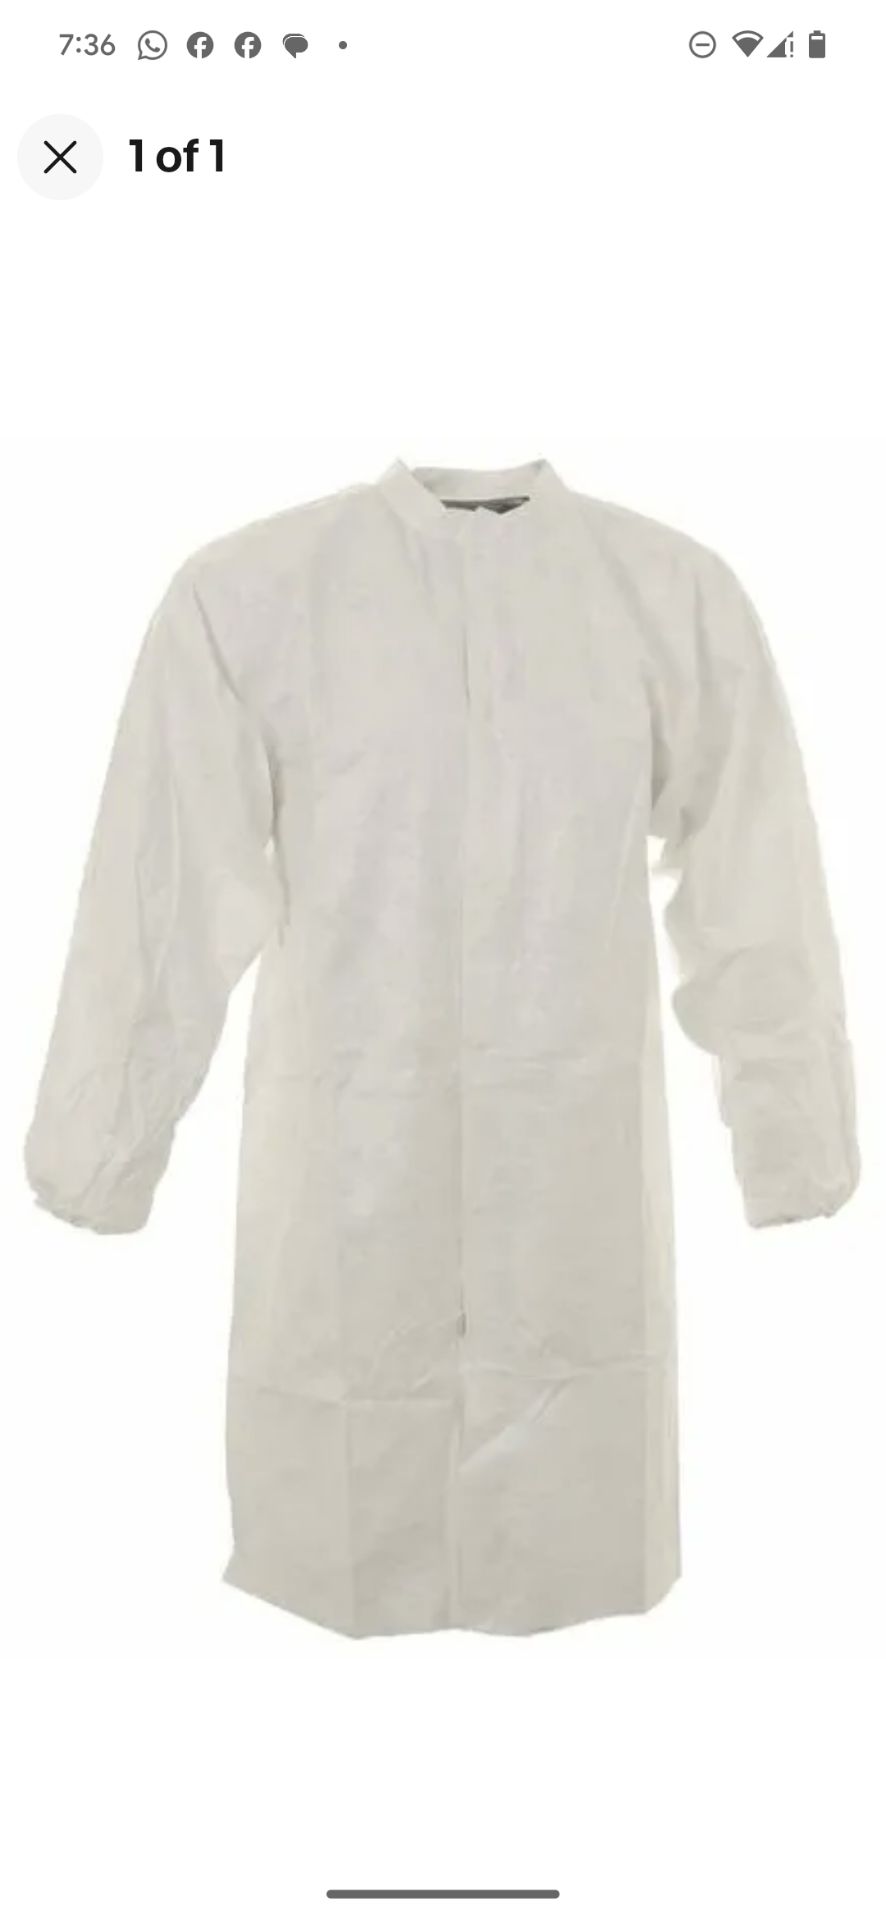 70 Disposable Lab Coats New